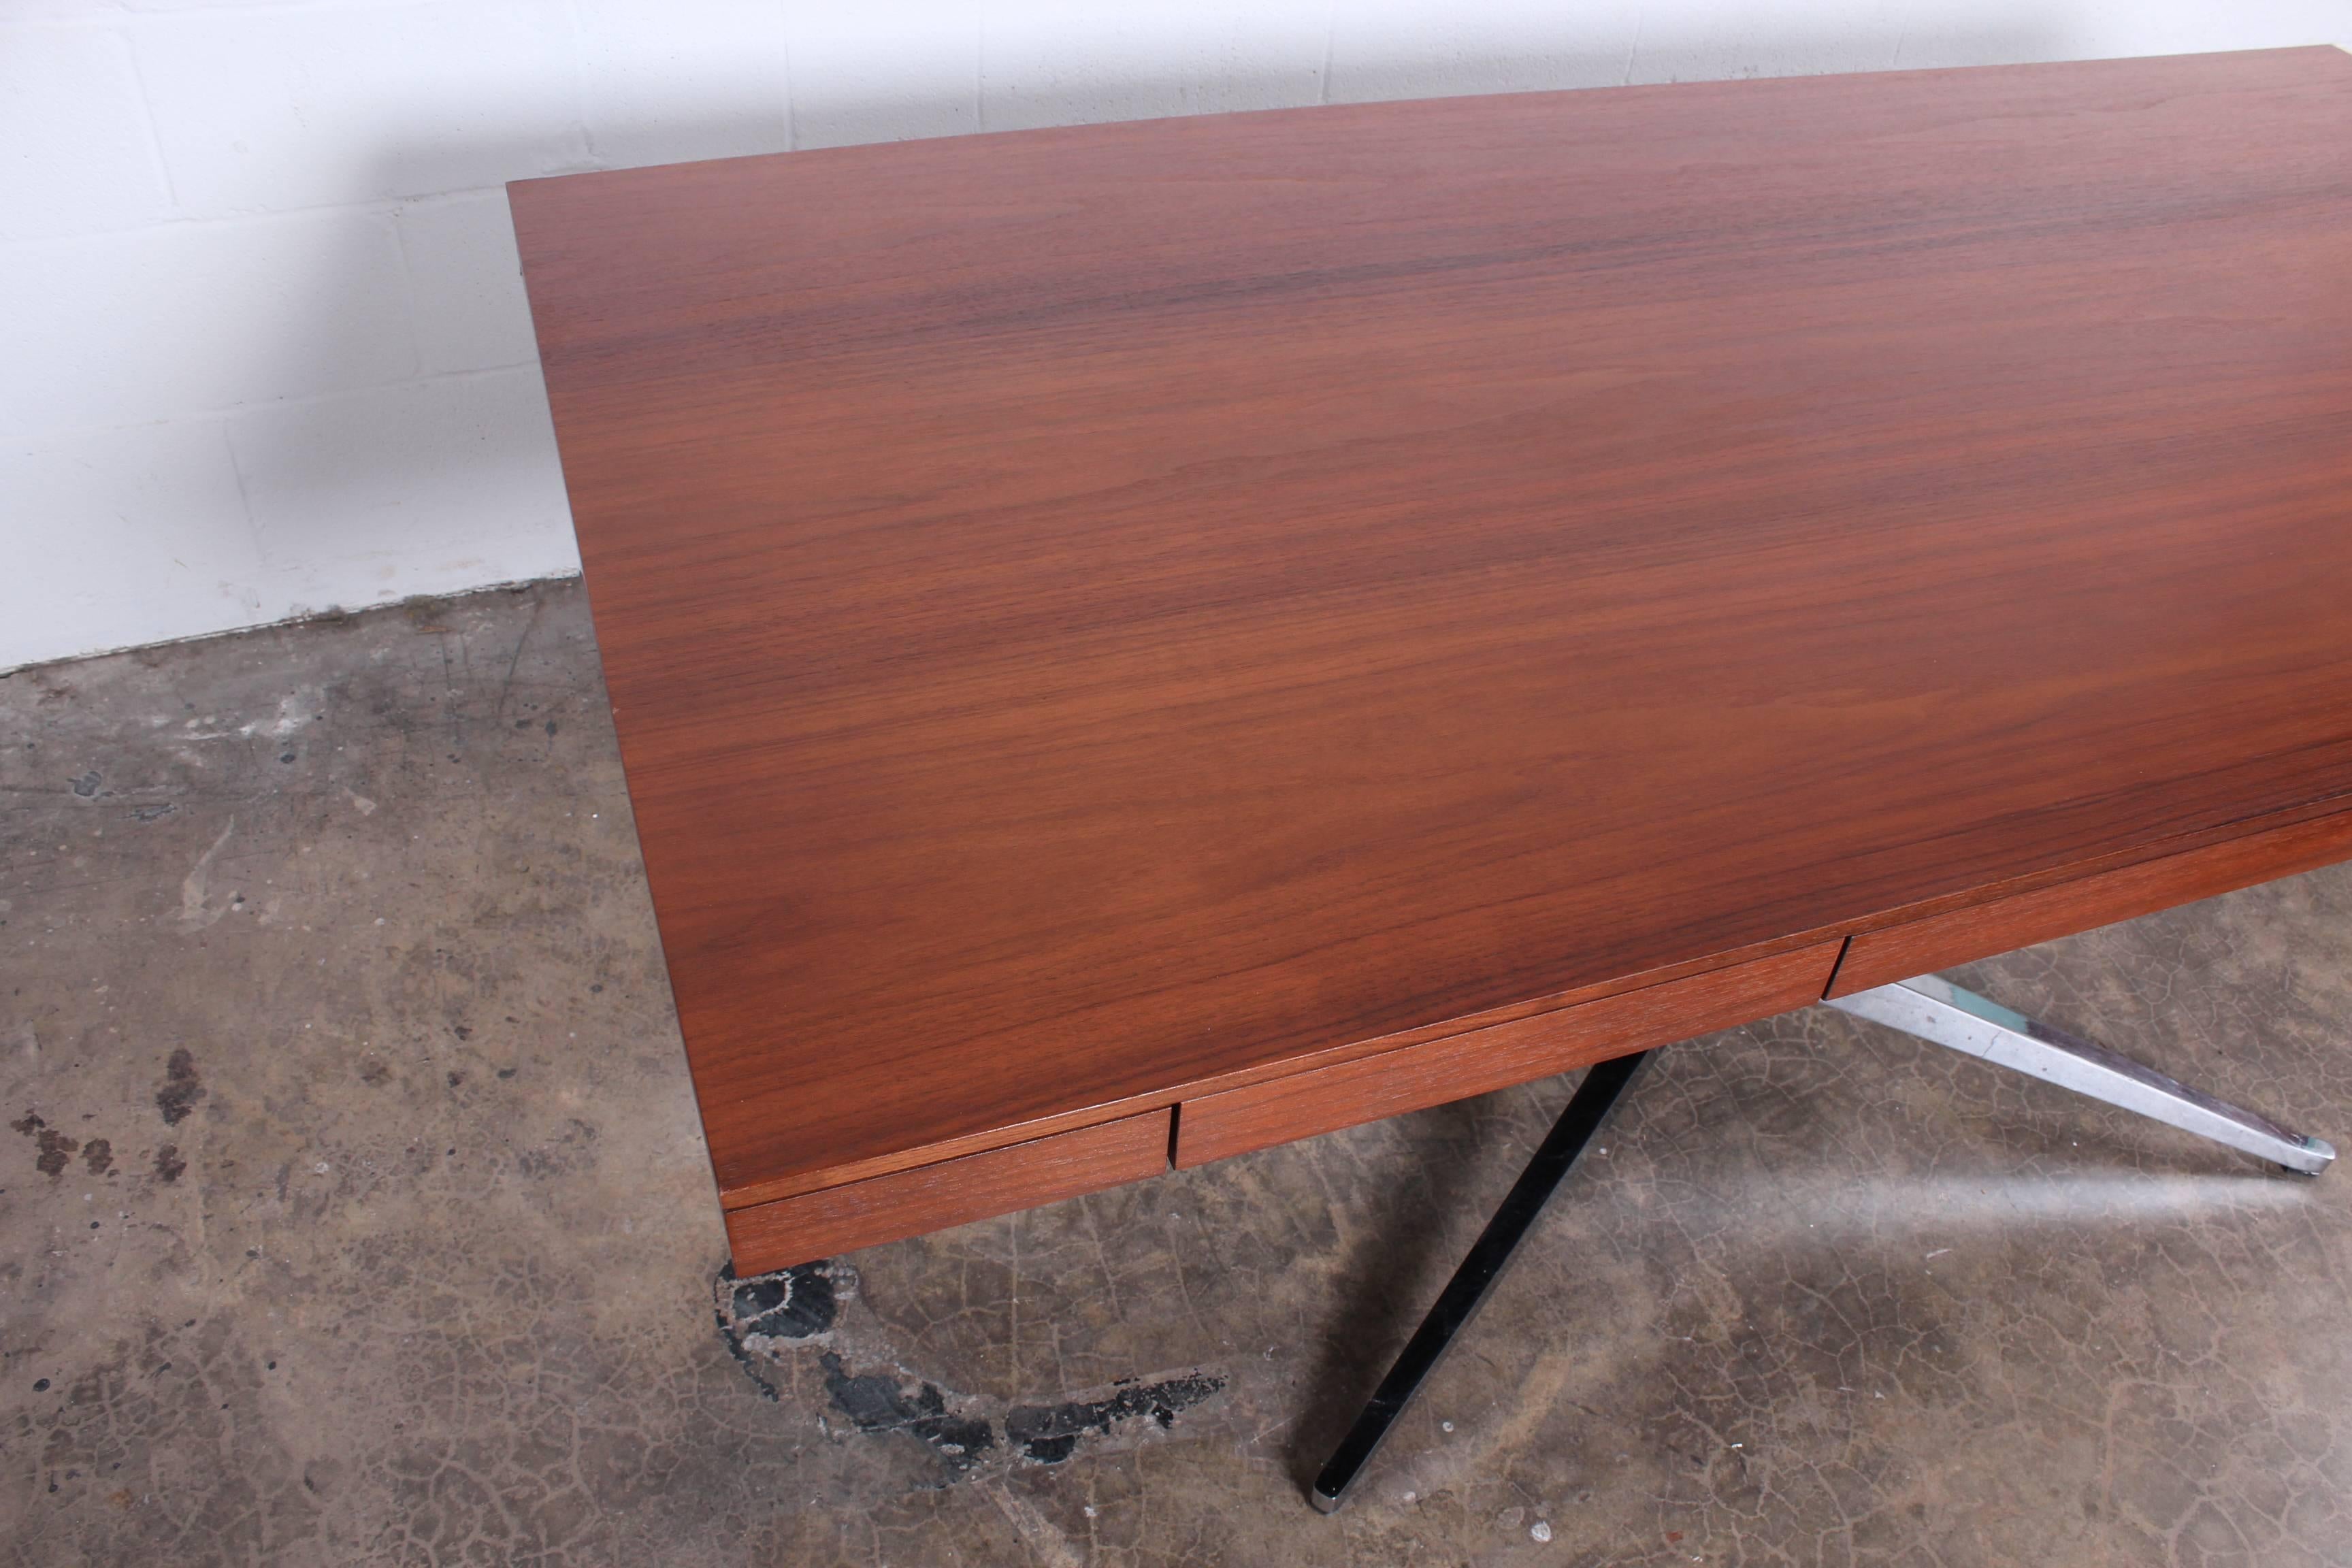 A rosewood partners desk designed by Florence Knoll.